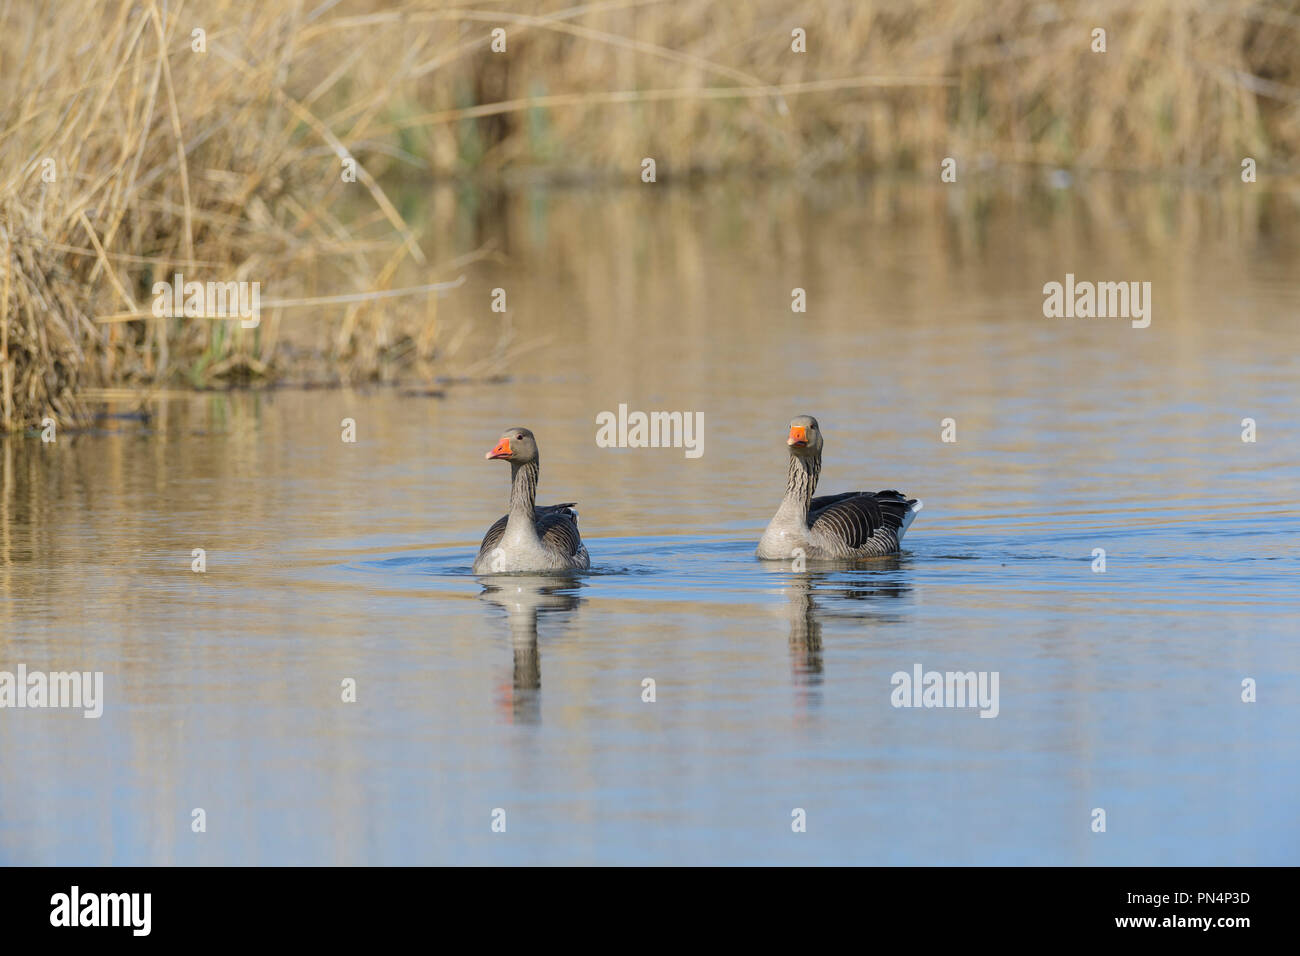 Greylag Goose, Anser anser, two geese in water swimming Stock Photo